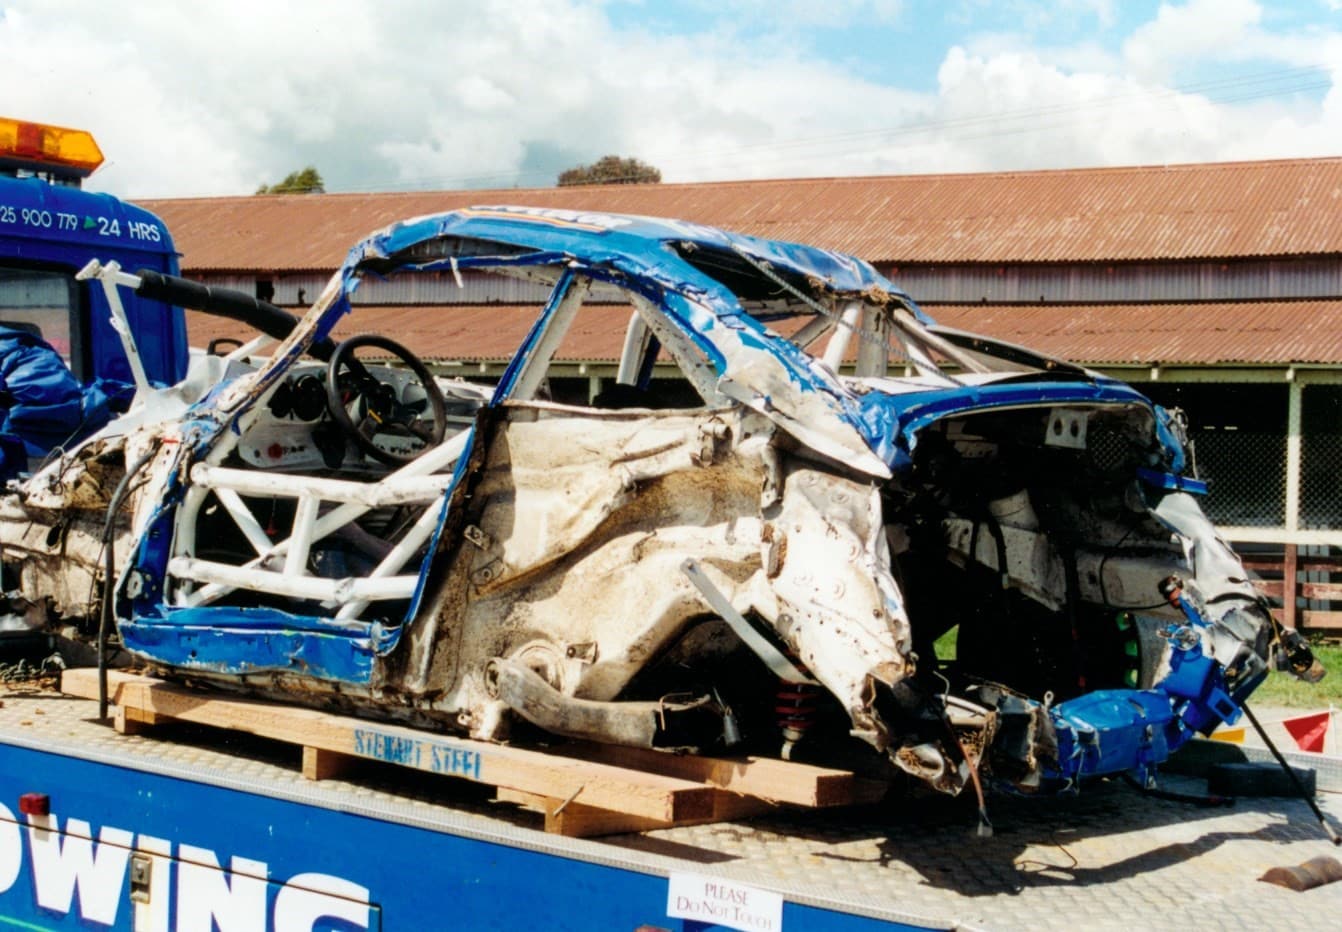 The remains of Owen’s Porsche 911 GT Le Mans Turbo after the high speed crash on 2 Jun 96. The car was on display at Manfeild on 9 Nov 96. It is now in the Southward Car Museum, Paraparaumu - Photo Jim Barclay